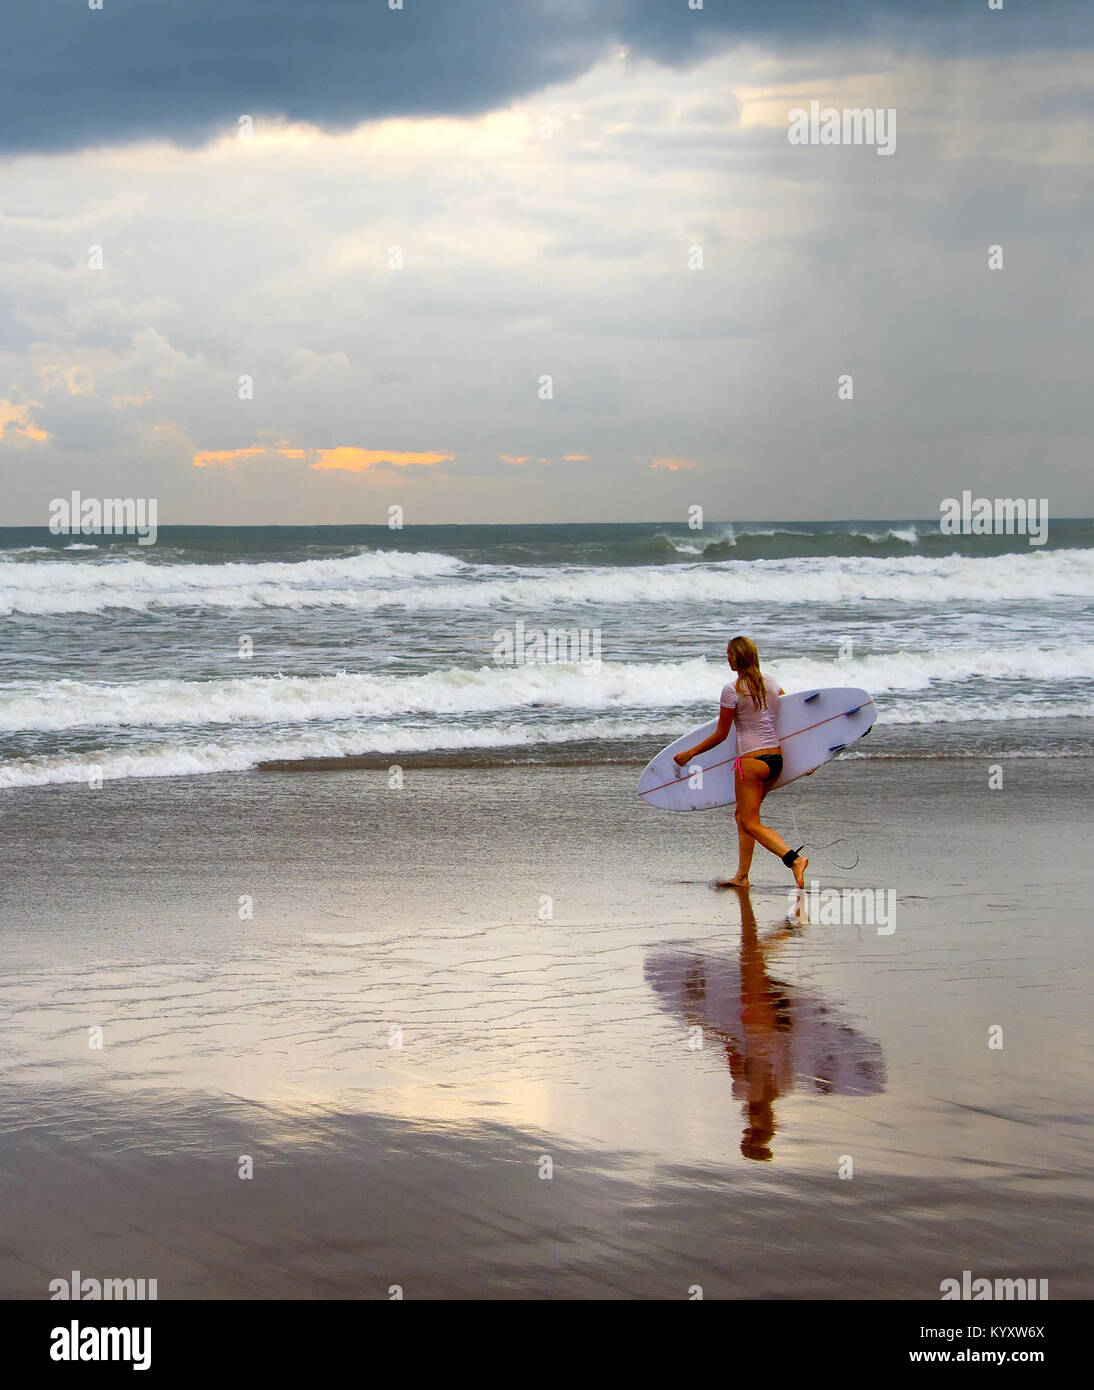 Woman surfer walking on the beach with surfboard at sunset. Bali island Stock Photo